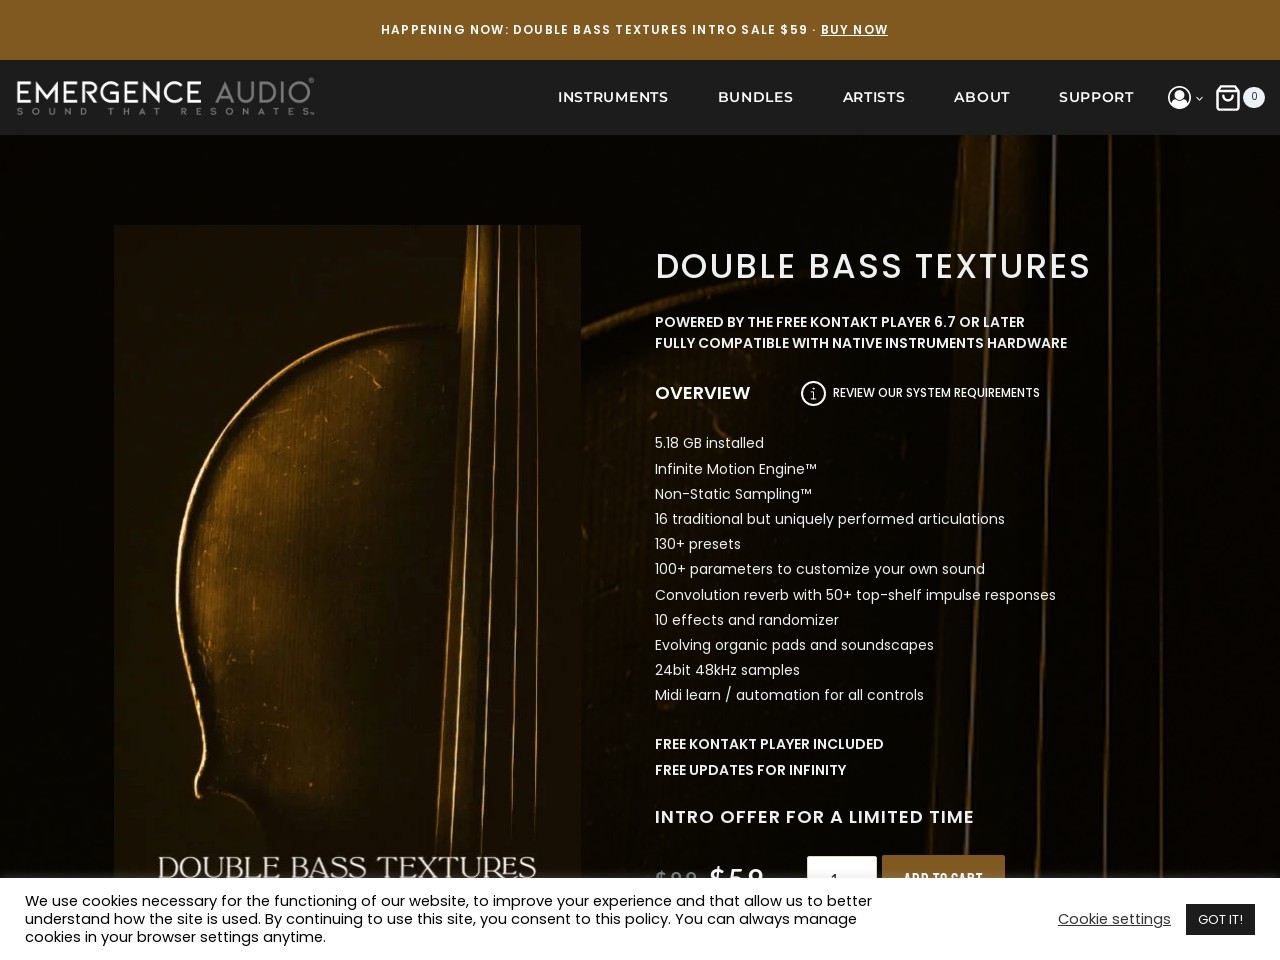 Double Bass Textures - Emergence Audio